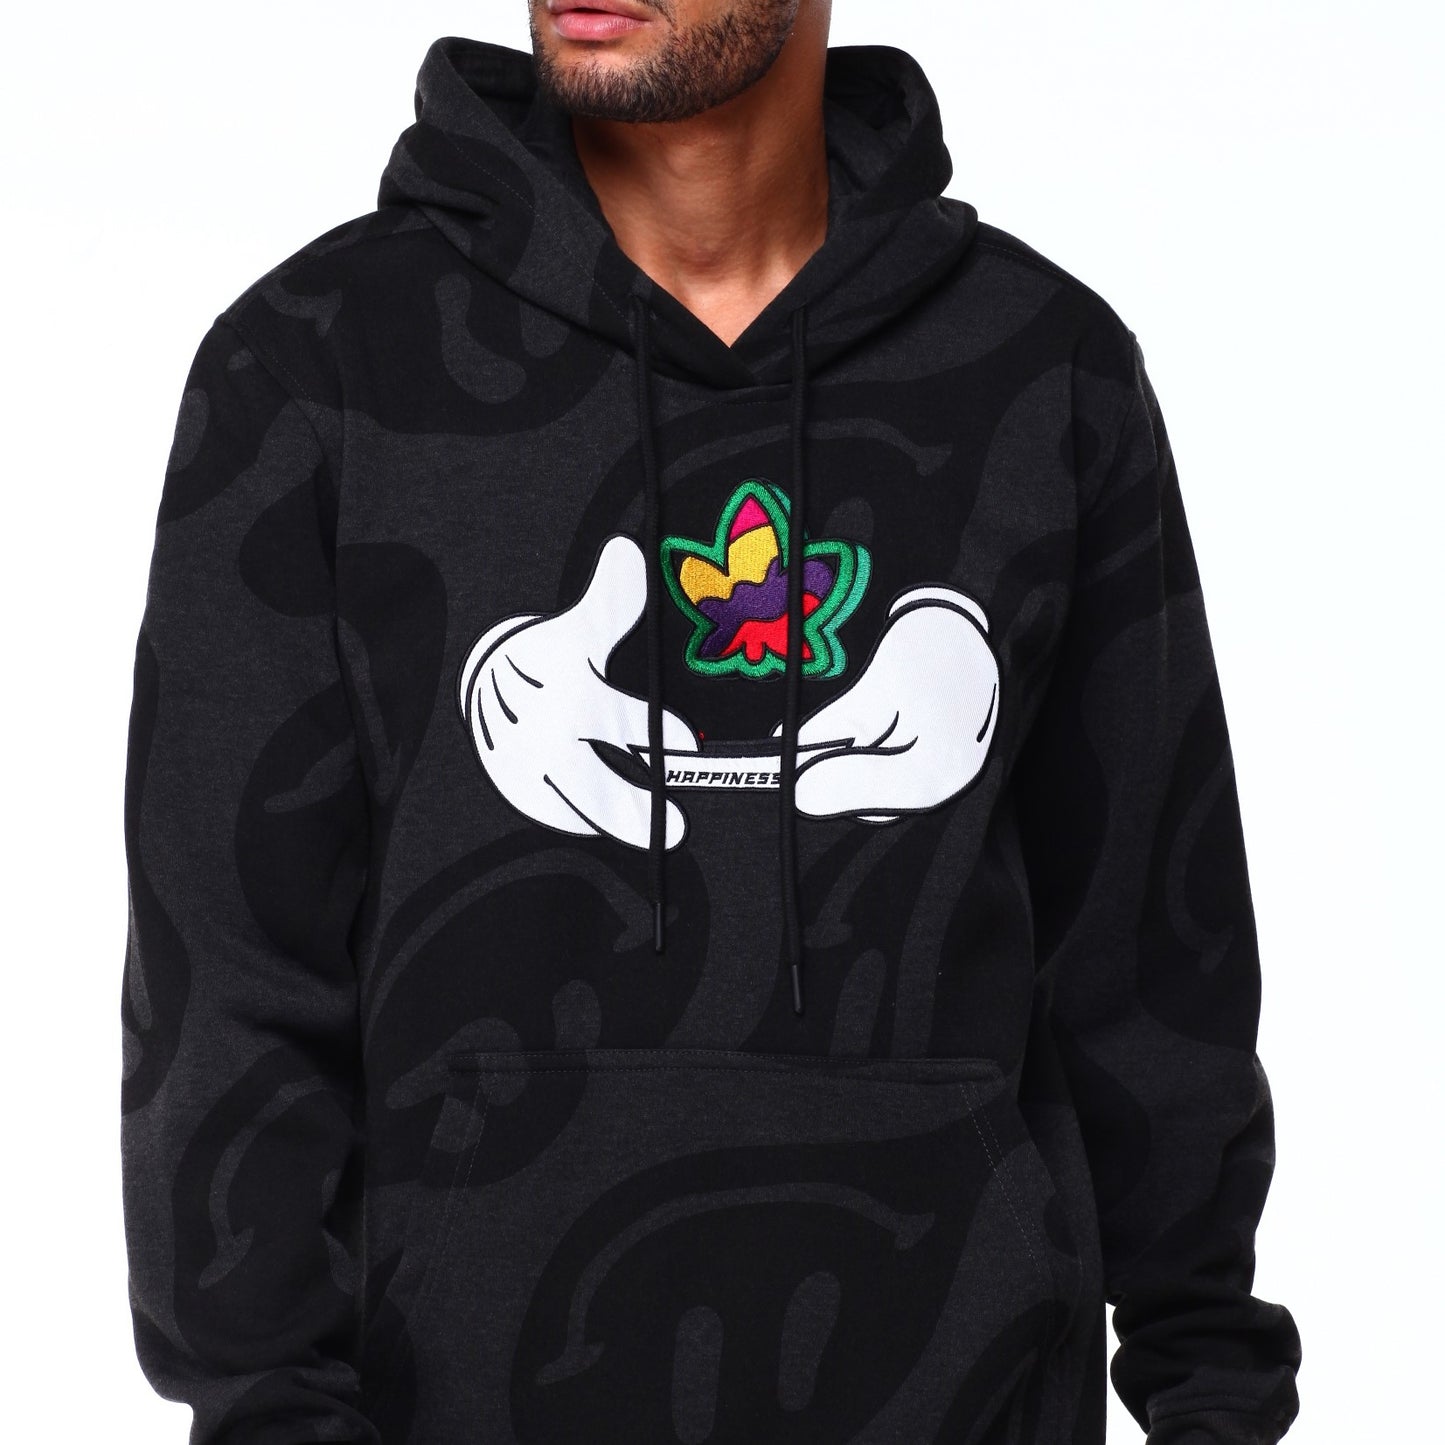 Rolling Paper Patches & Emb Hoody - Black